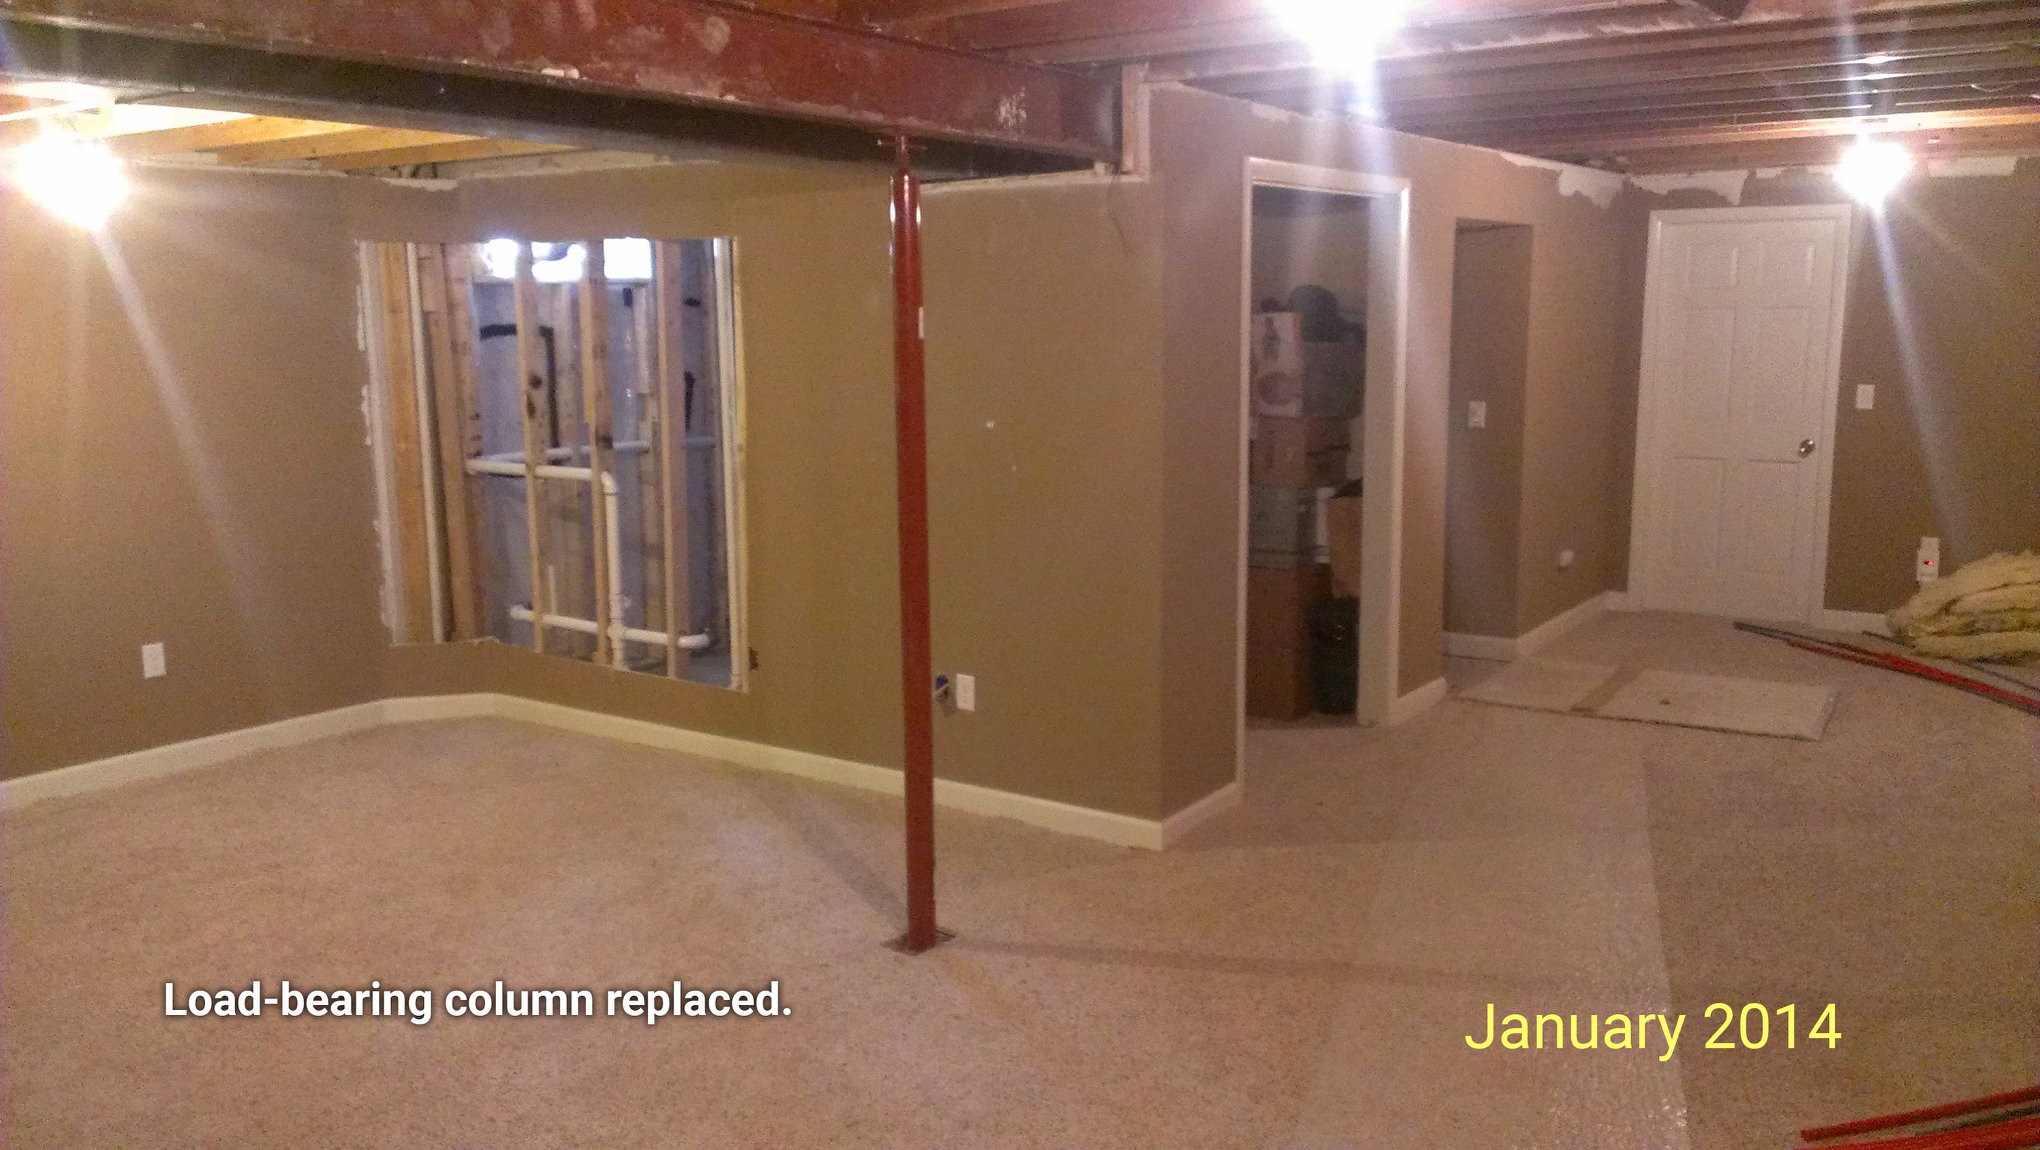 A finished basement as seen in January 2014 with a load bearing column replaced under a central beam.